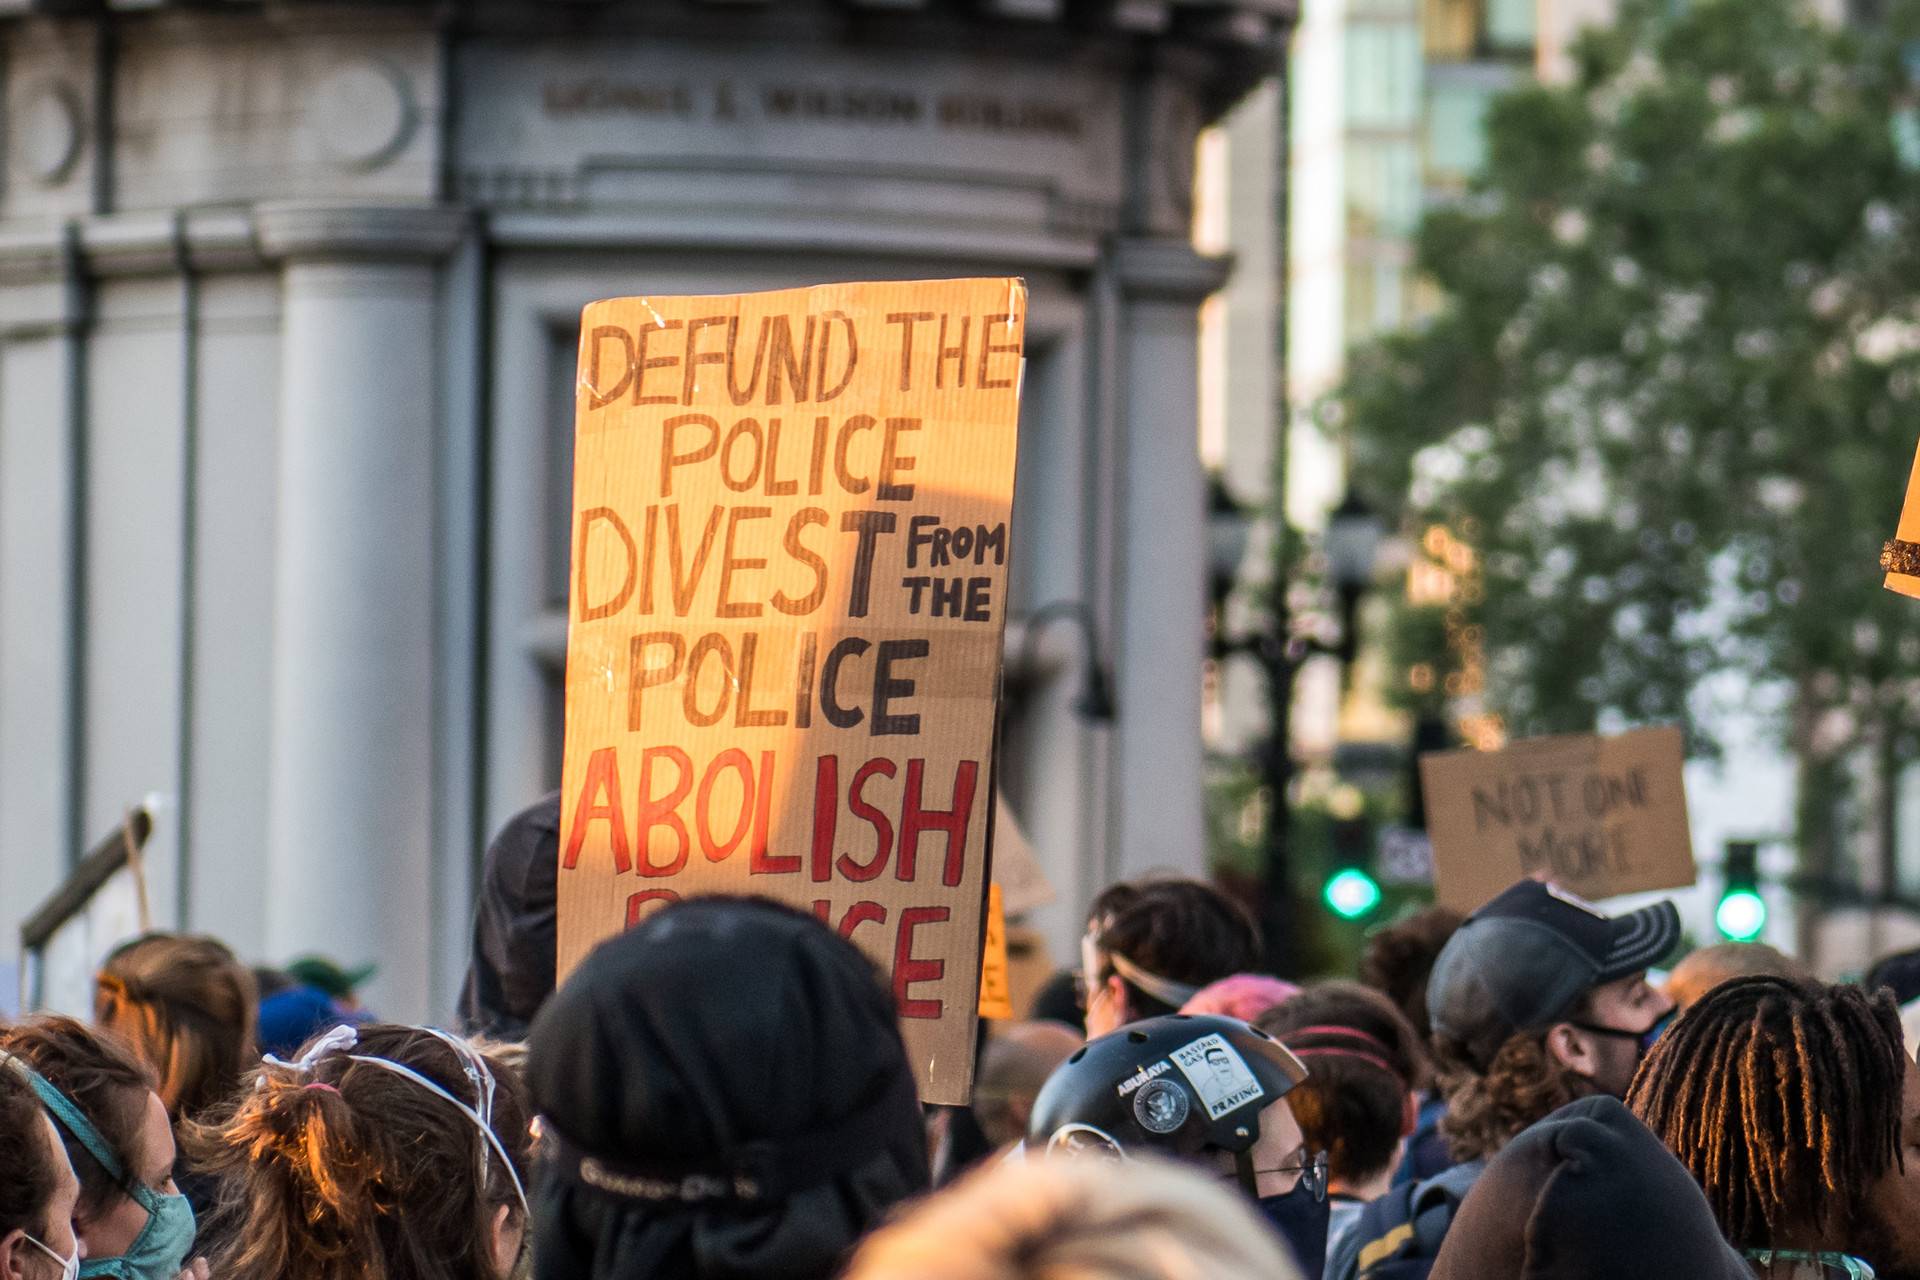 Demonstrators gather in Downtown Oakland to listen to speakers during a protest against police violence on June 3, 2020. Beth LaBerge/KQED